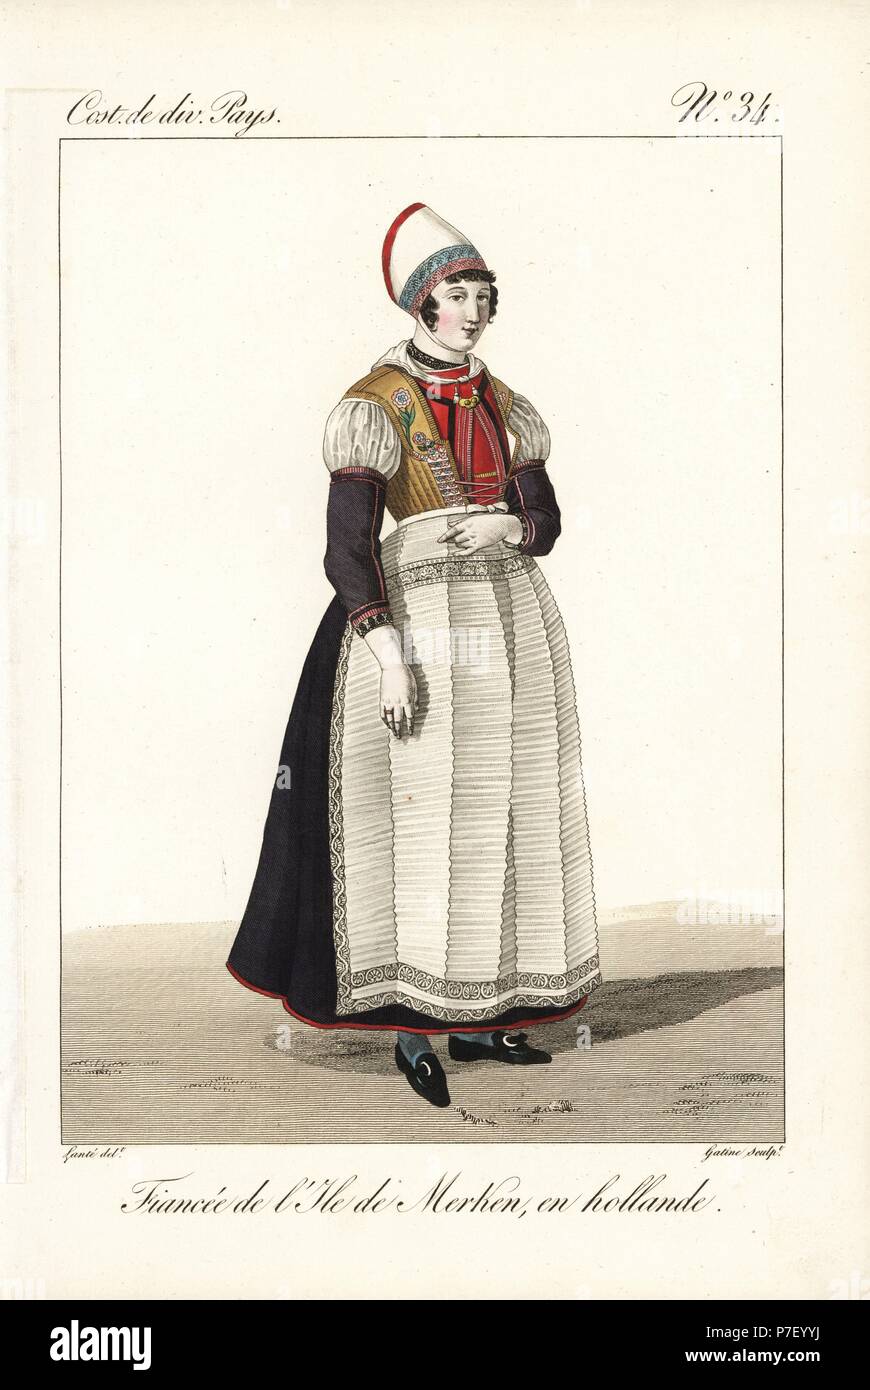 Betrothed girl of Marken Island, North Holland, Netherlands, 19th century. In traditional costume that is unchanged since the 13th century. She wears a high headdress, bodice, chemise, false sleeves, apron, and petticoats. Her embroidered apron has large vertical bands. Handcoloured copperplate engraving by Georges Jacques Gatine after an illustration by Louis Marie Lante from Costumes of Various Countries, Costumes de Divers Pays, Paris, 1827. Stock Photo